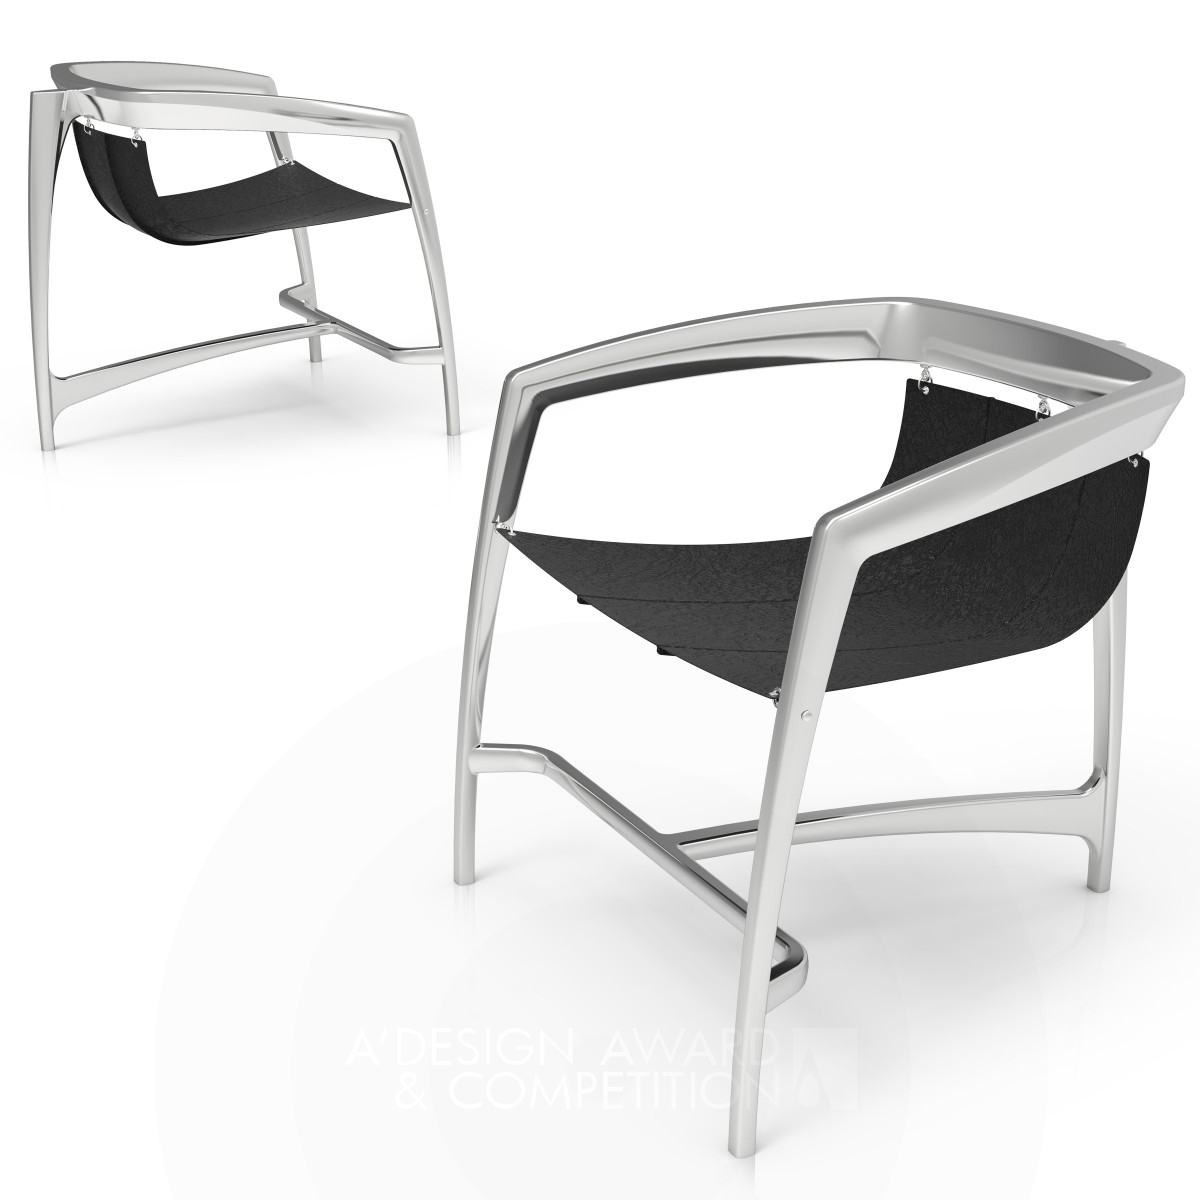 WEI Chair Abstract shapes by Wei Jingye